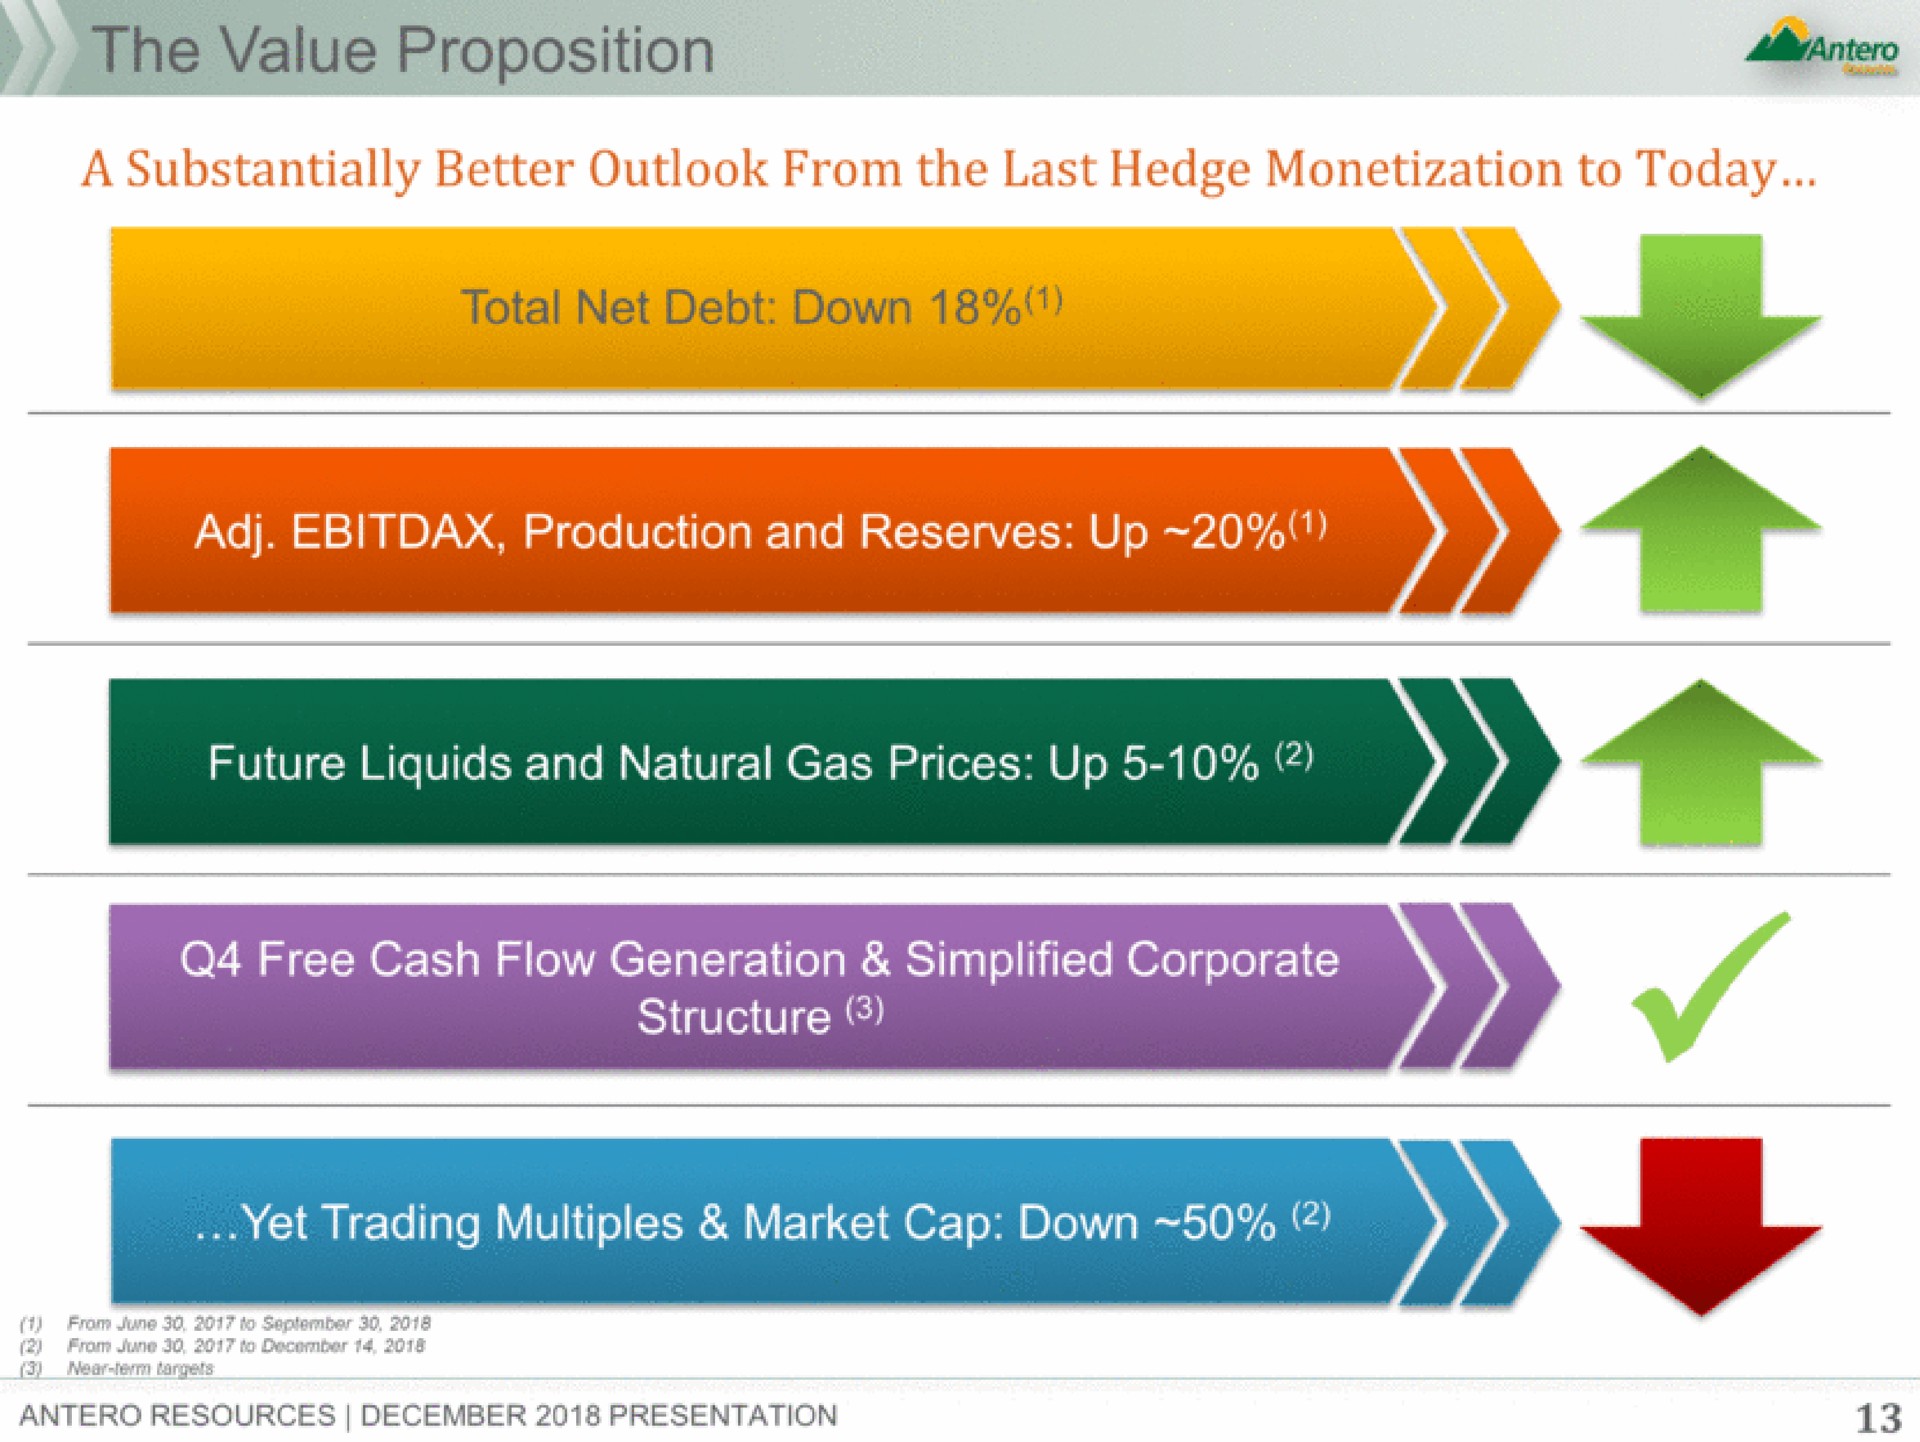 future liquids and natural gas prices up free cash flow generation simplified corporate structure yet trading multiples market cap down | Antero Midstream Partners